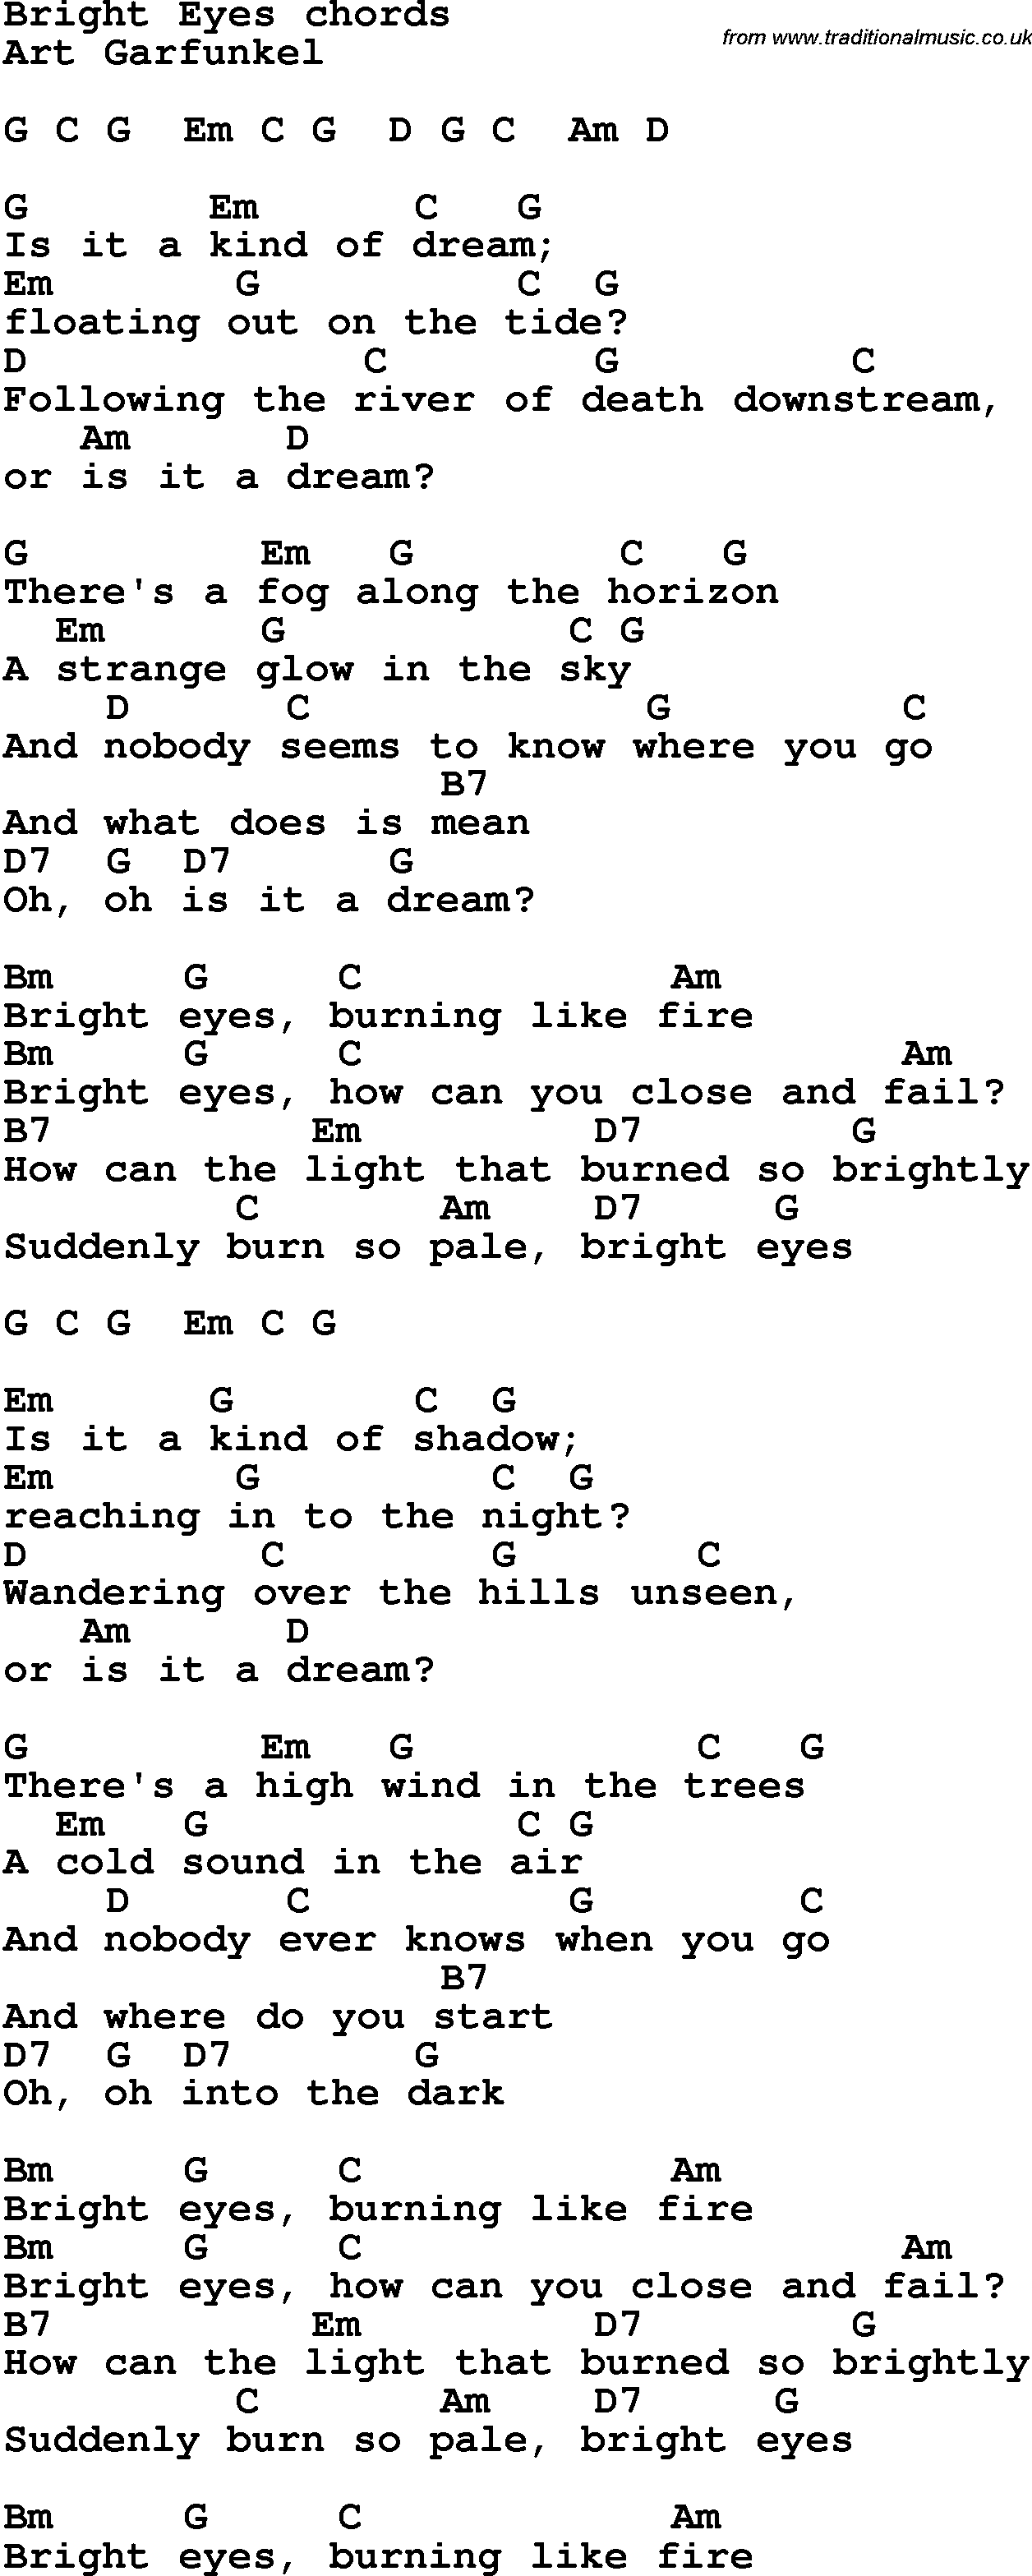 Song Lyrics with guitar chords for Bright Eyes